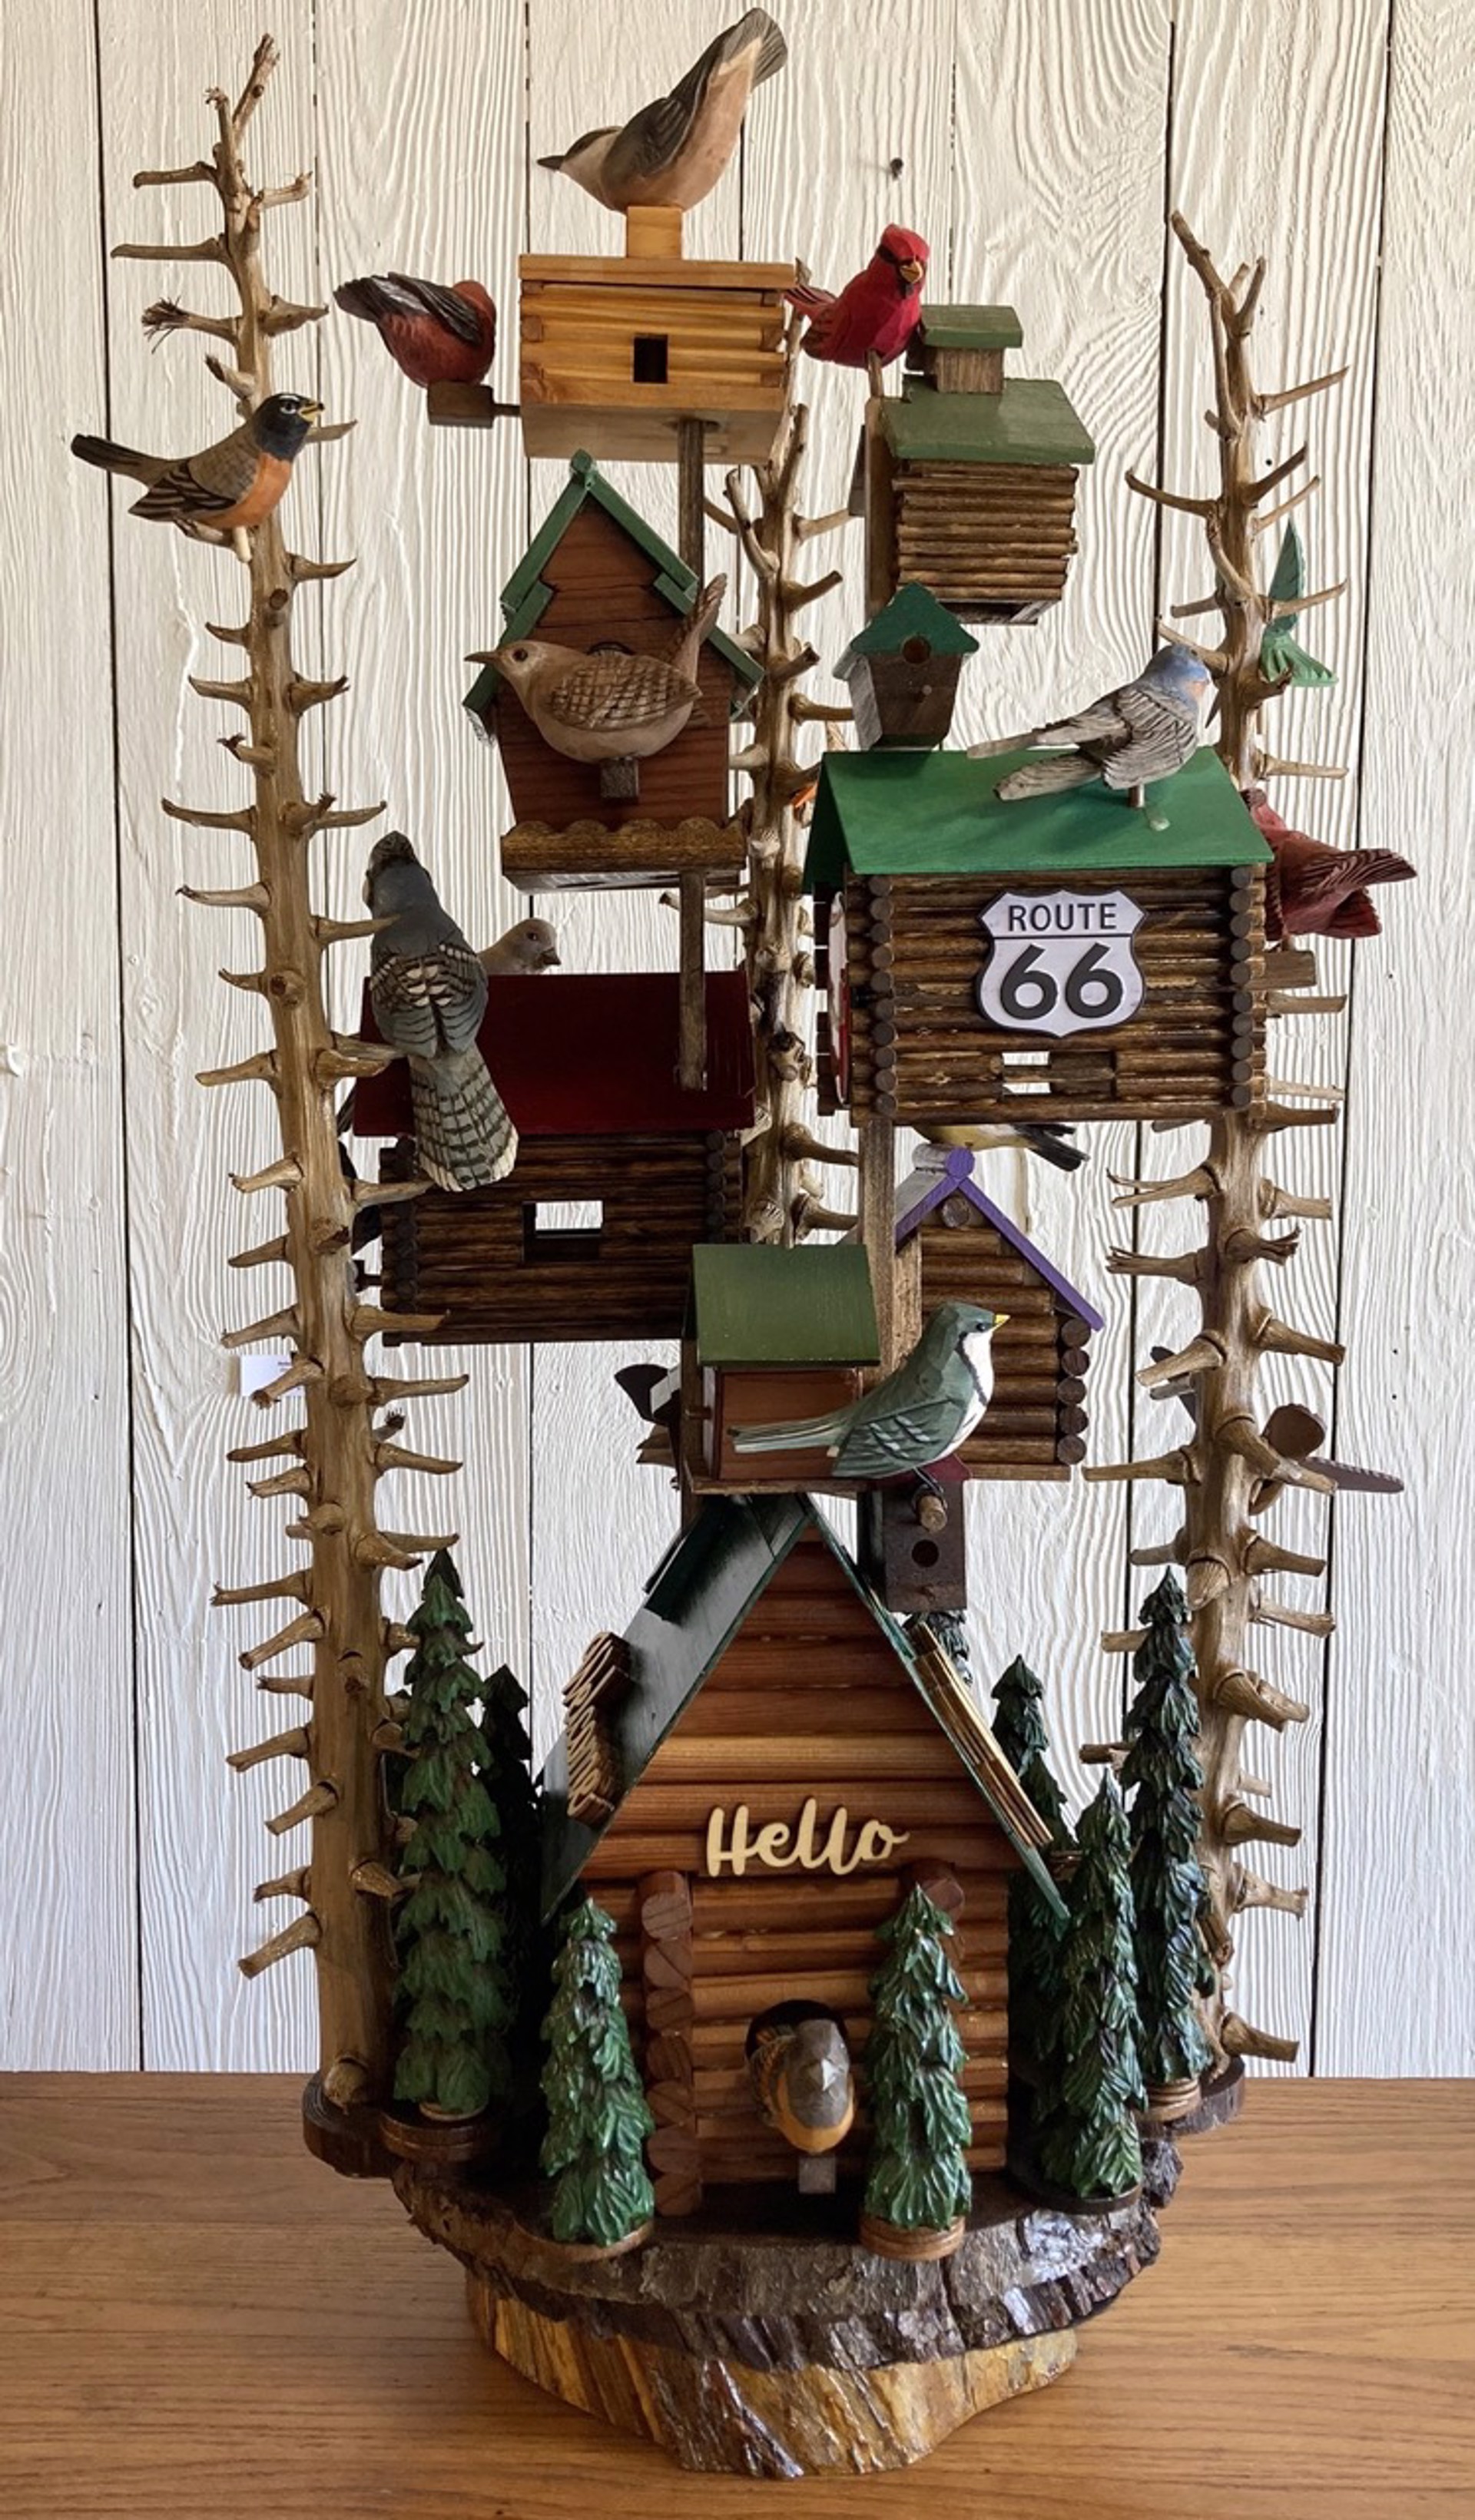 Bird House by Dale Smith